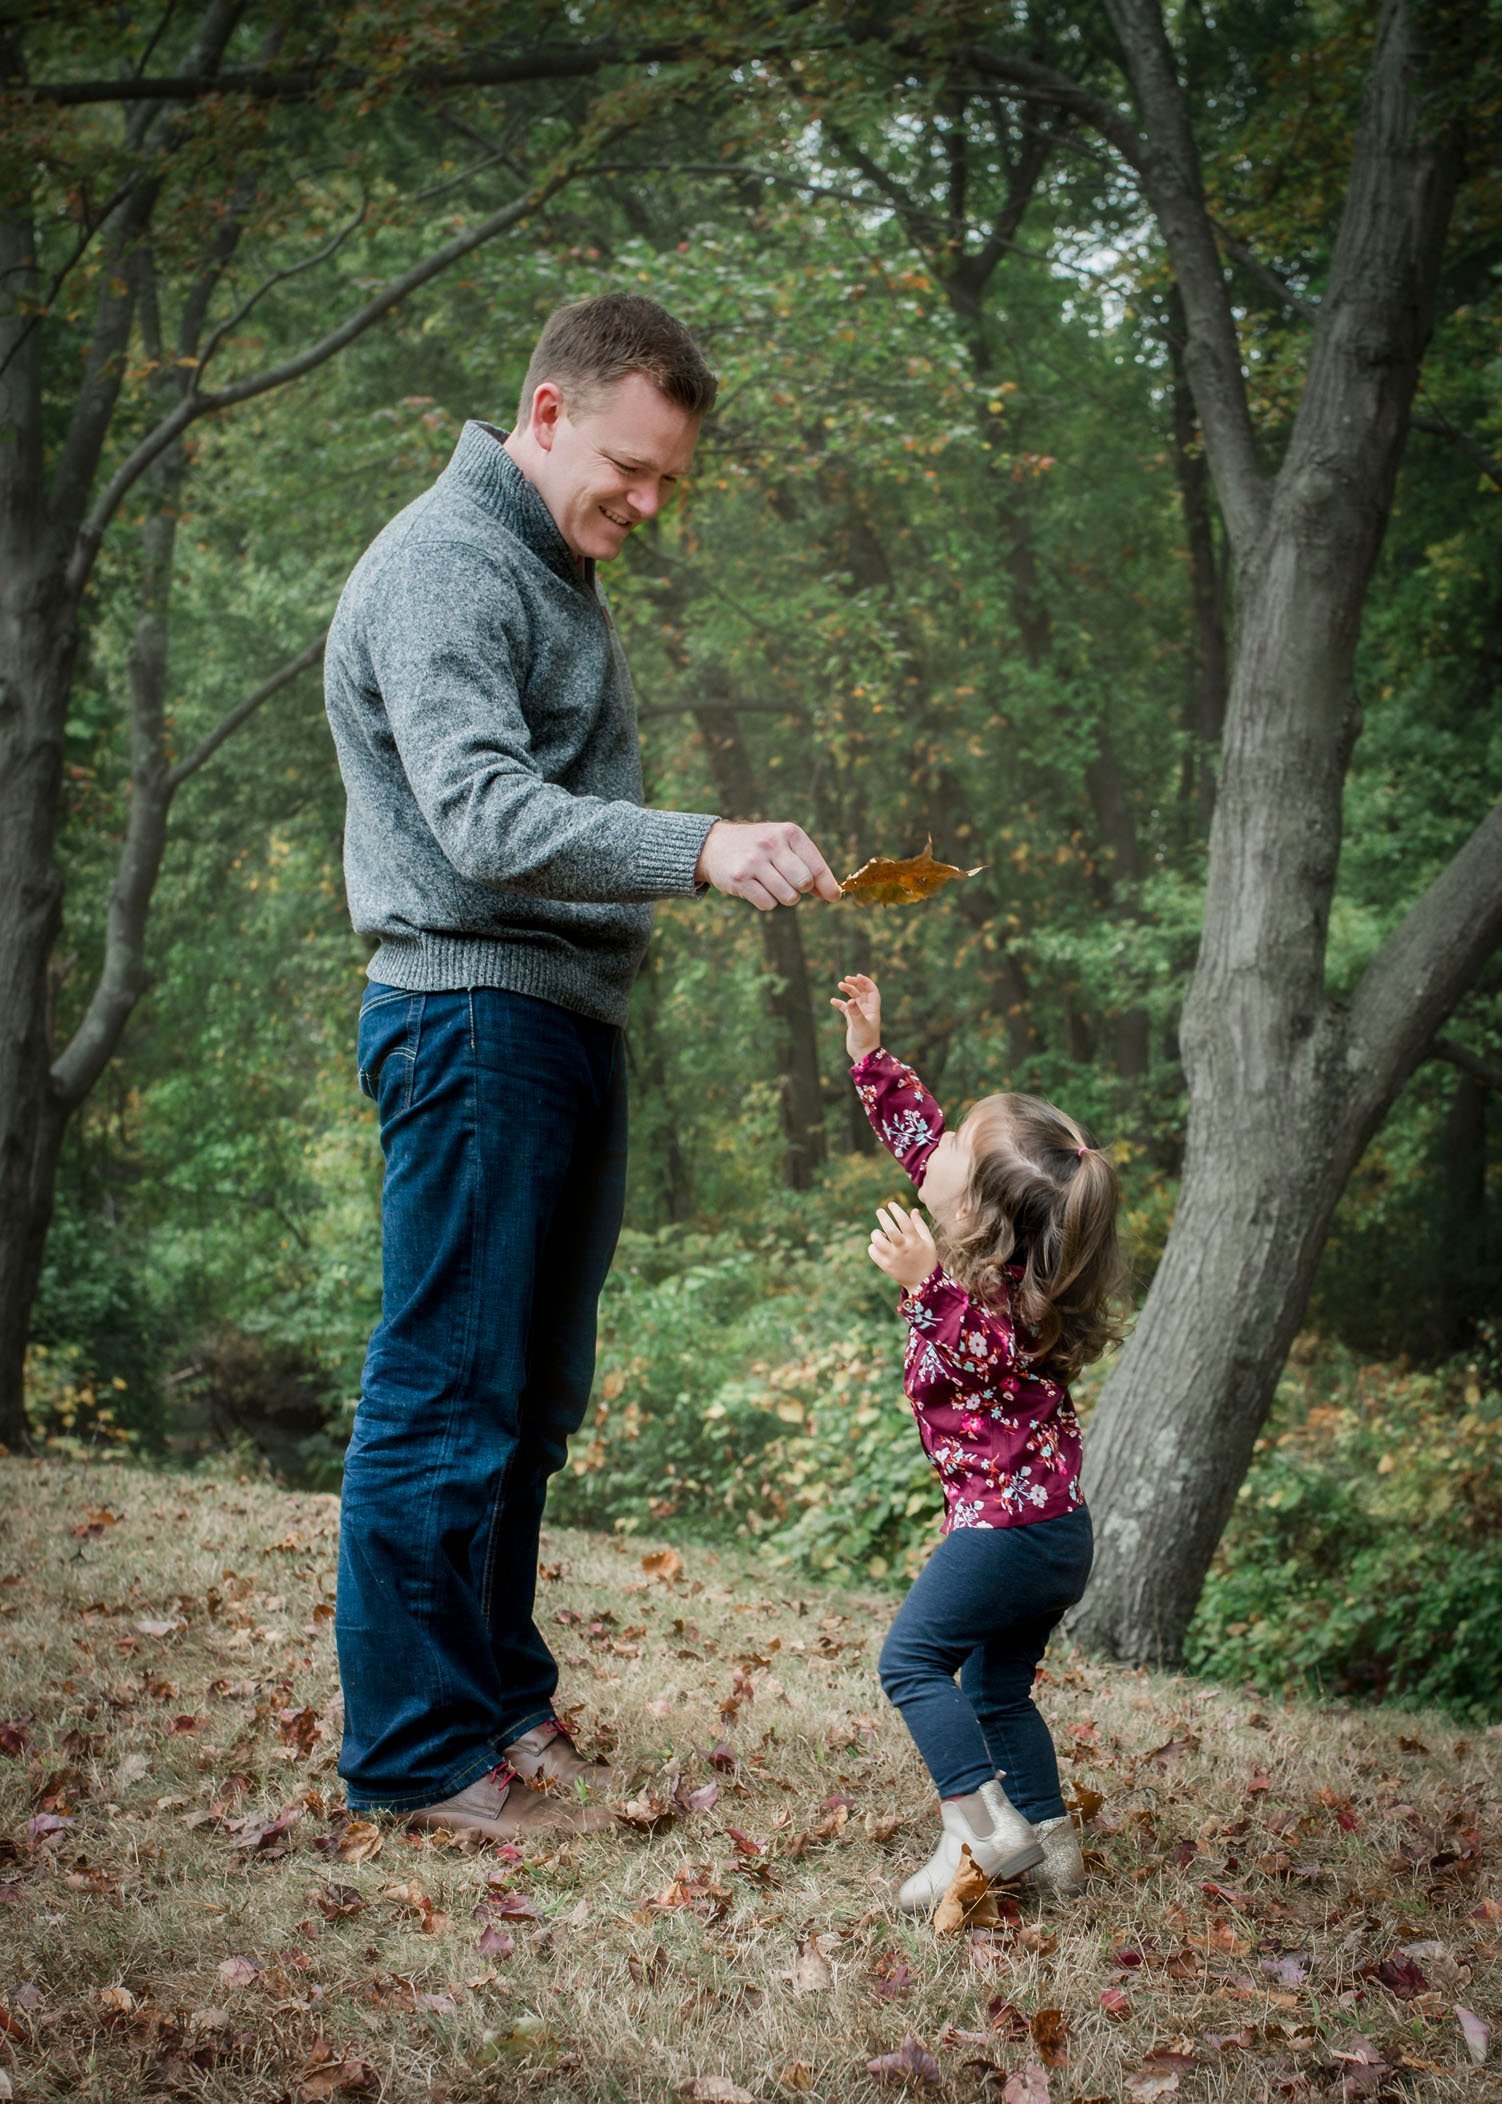 Dad holding big leaf for 2 year old to jump and get